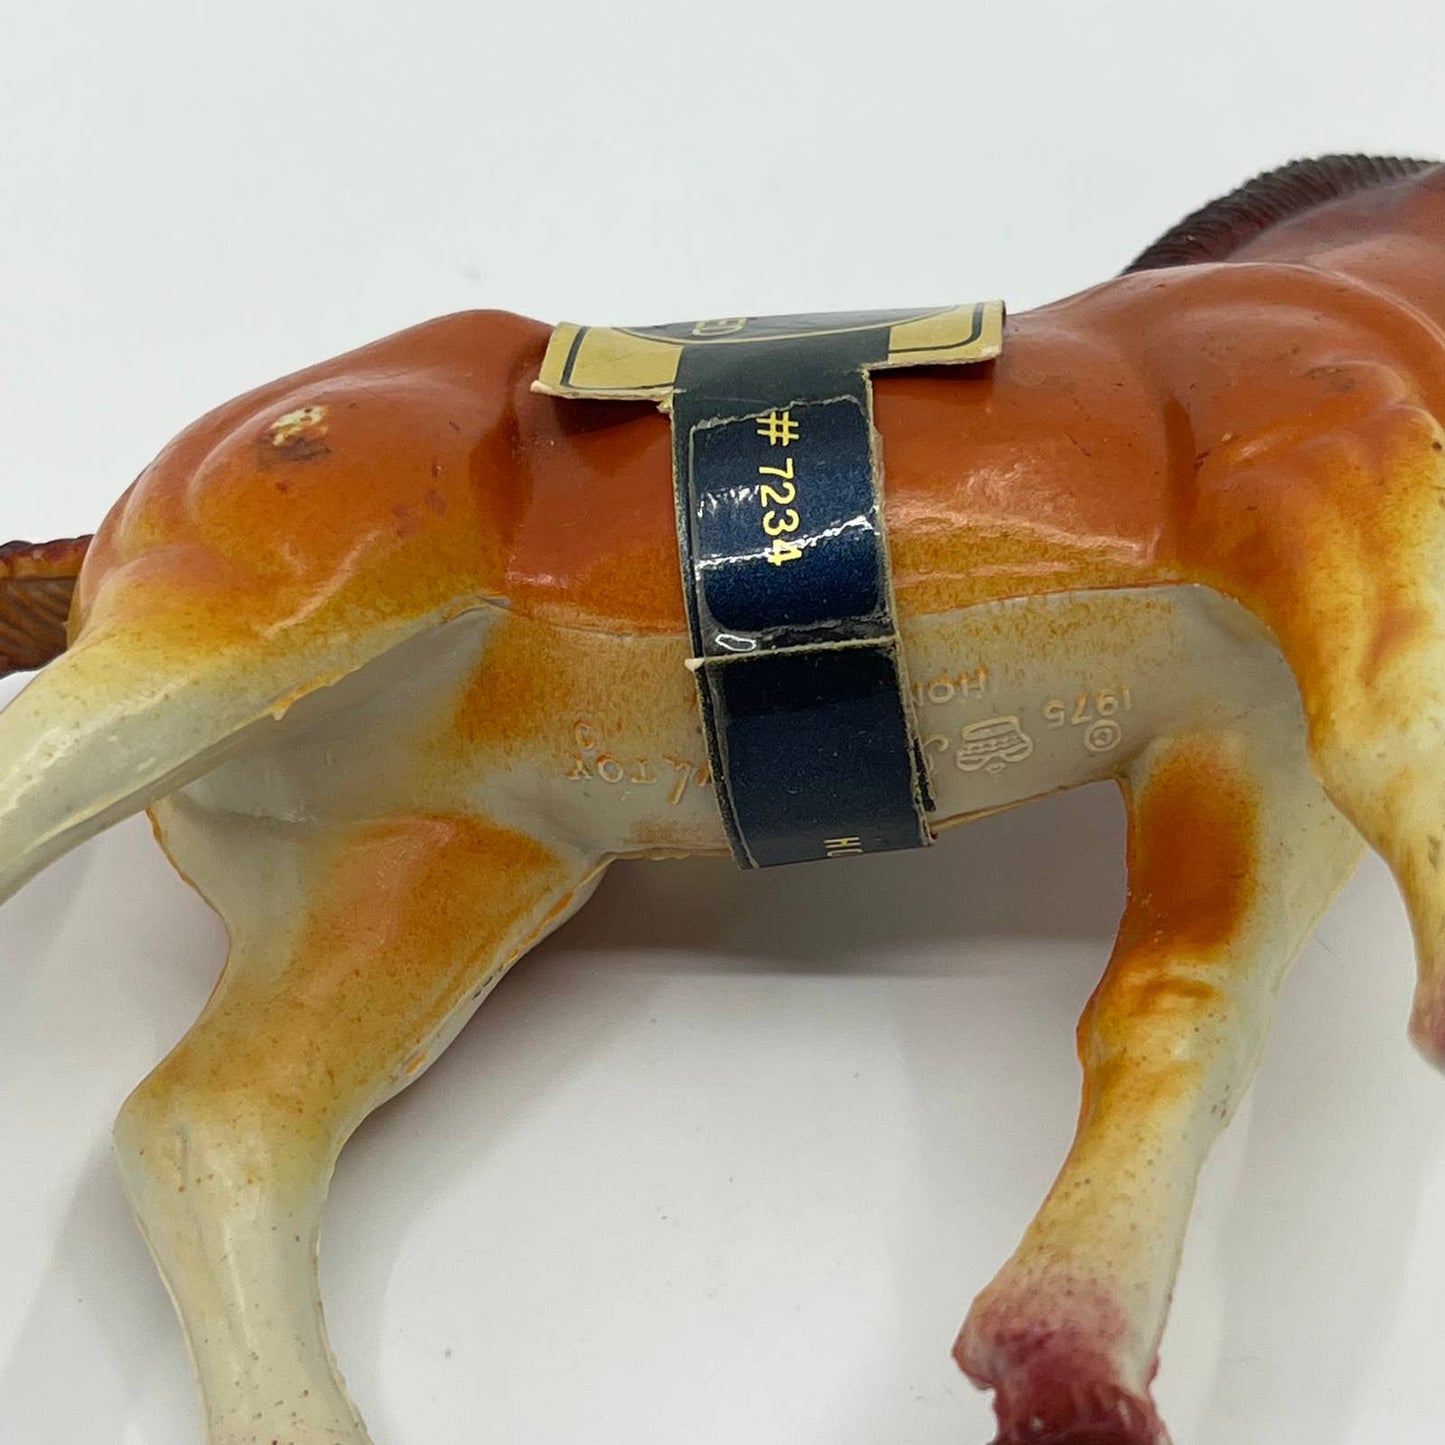 Vintage 1975 Rubber #7234  Imperial Thoroughbred Horse Figurine With Label SA2